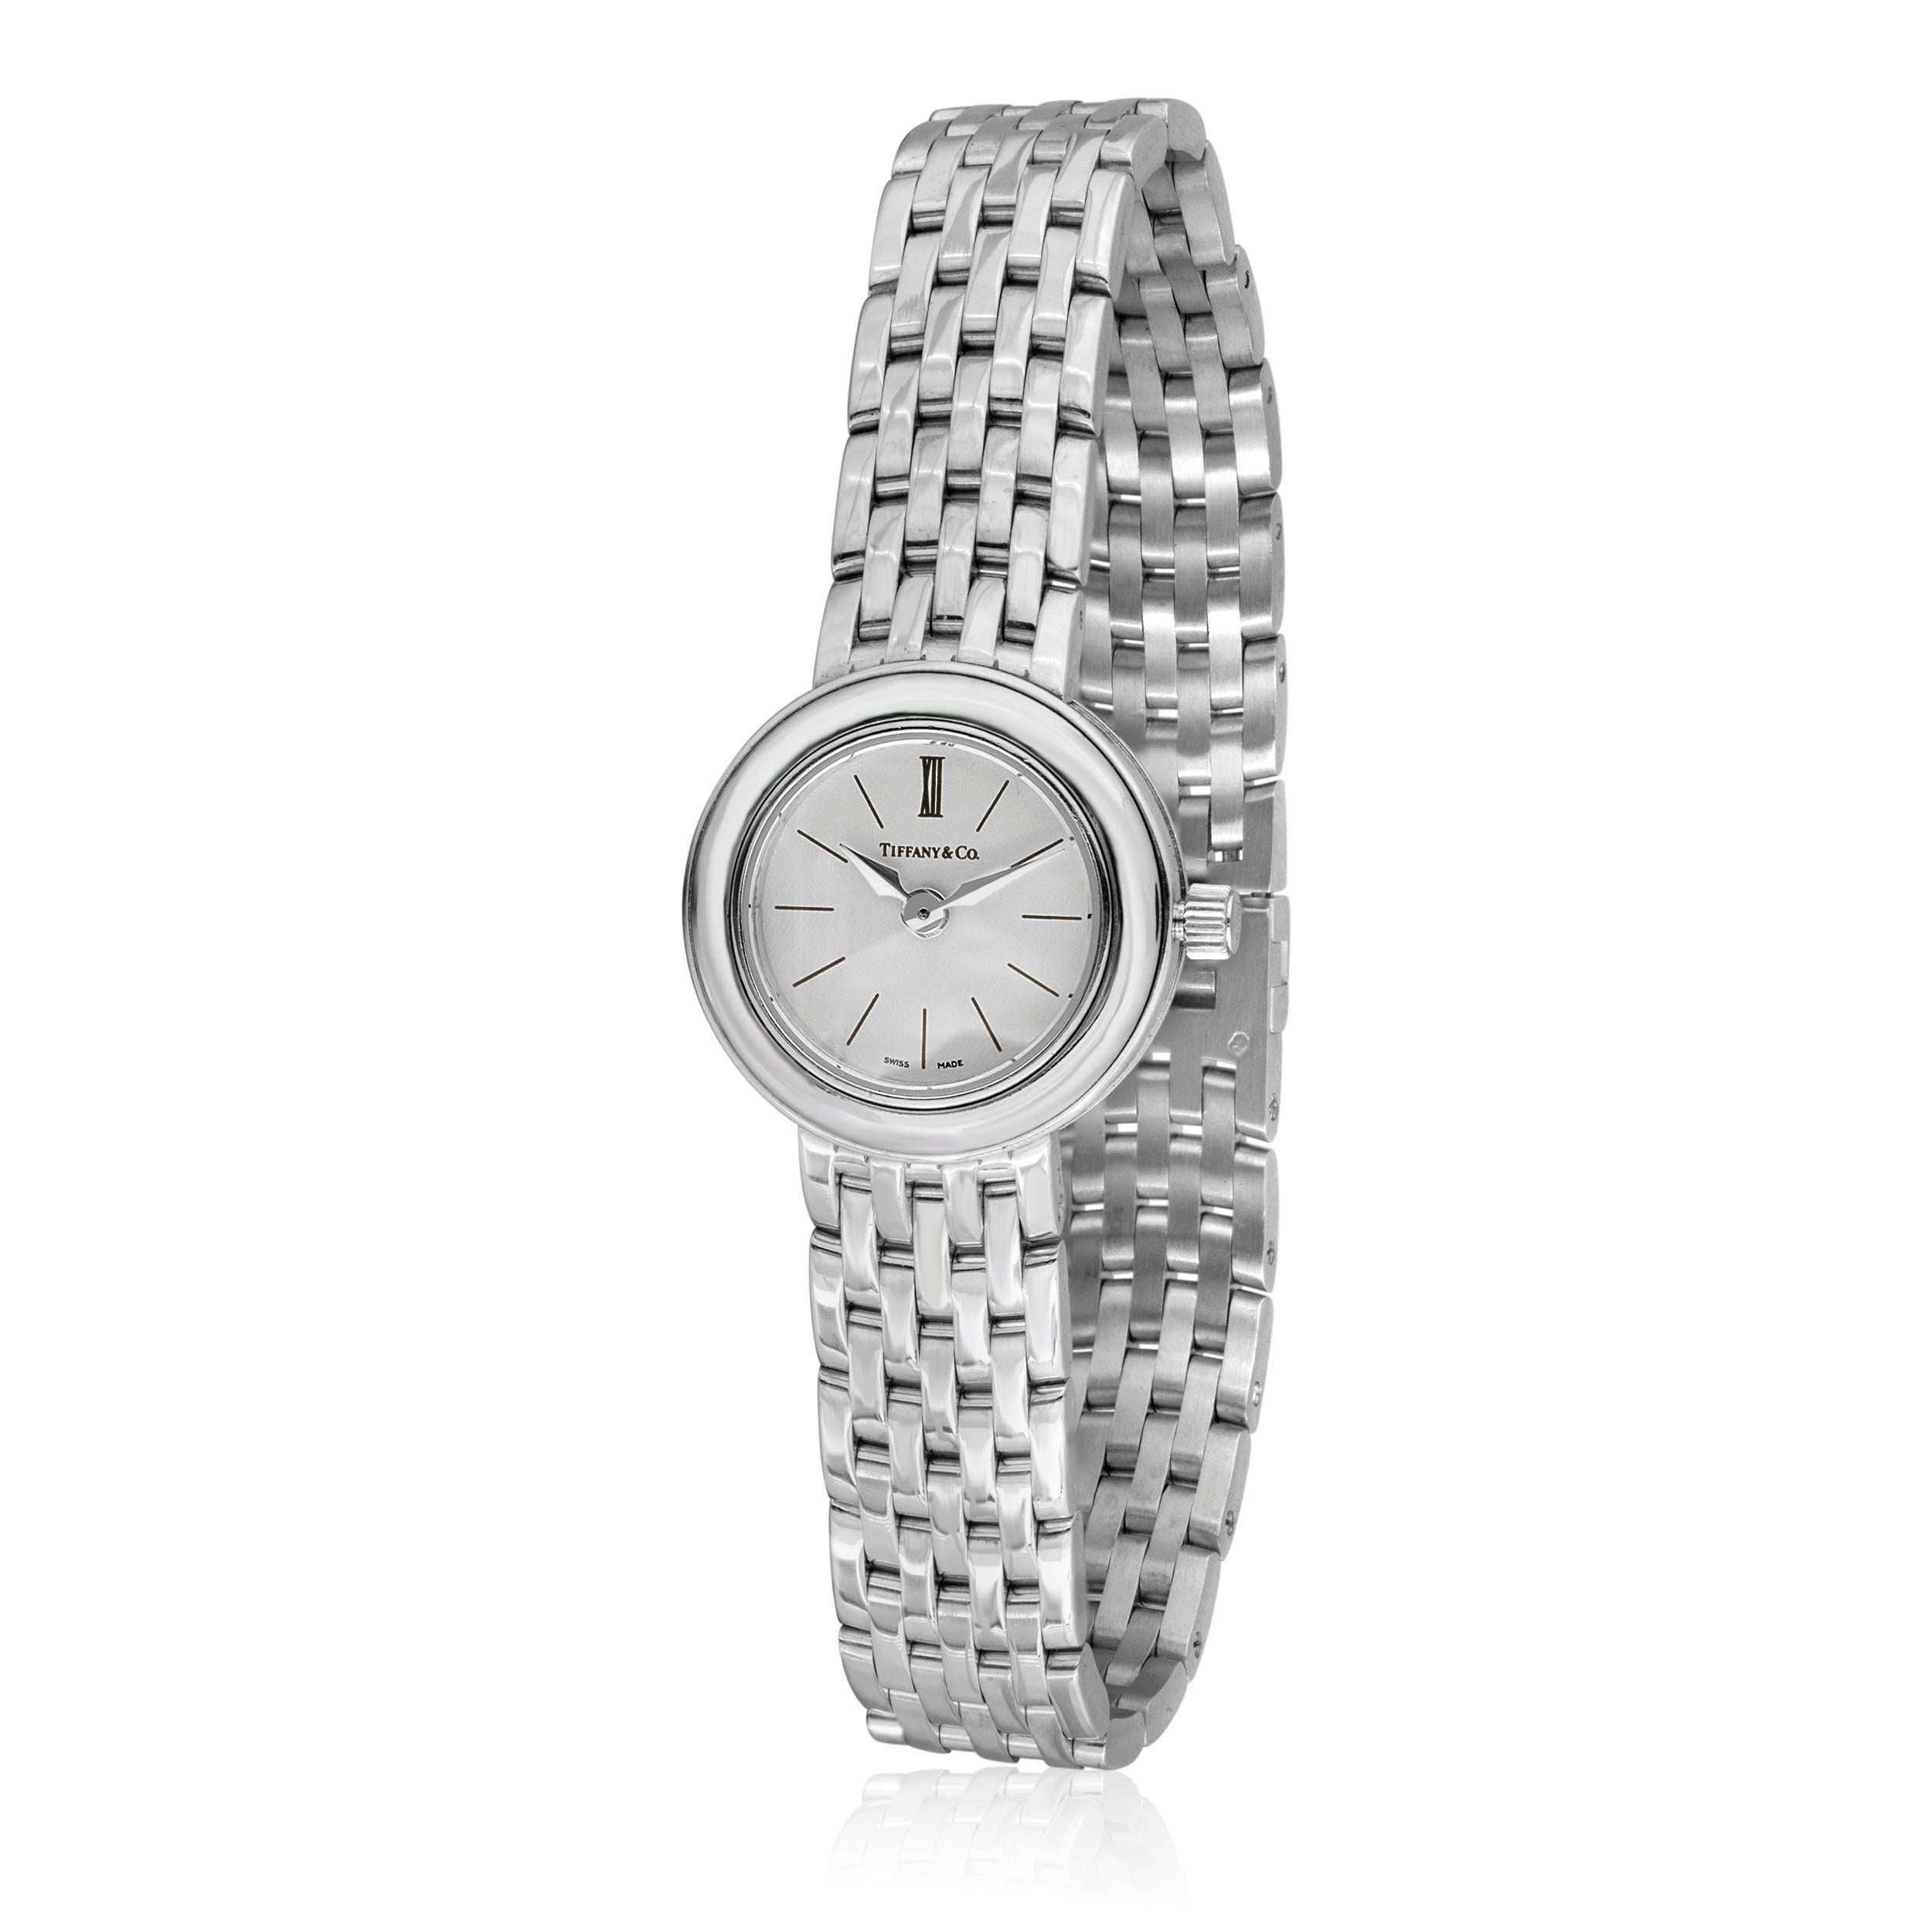 Beautiful Tiffany & Co. Watch.
The watch is 18K White Gold.
It fits up to a 7